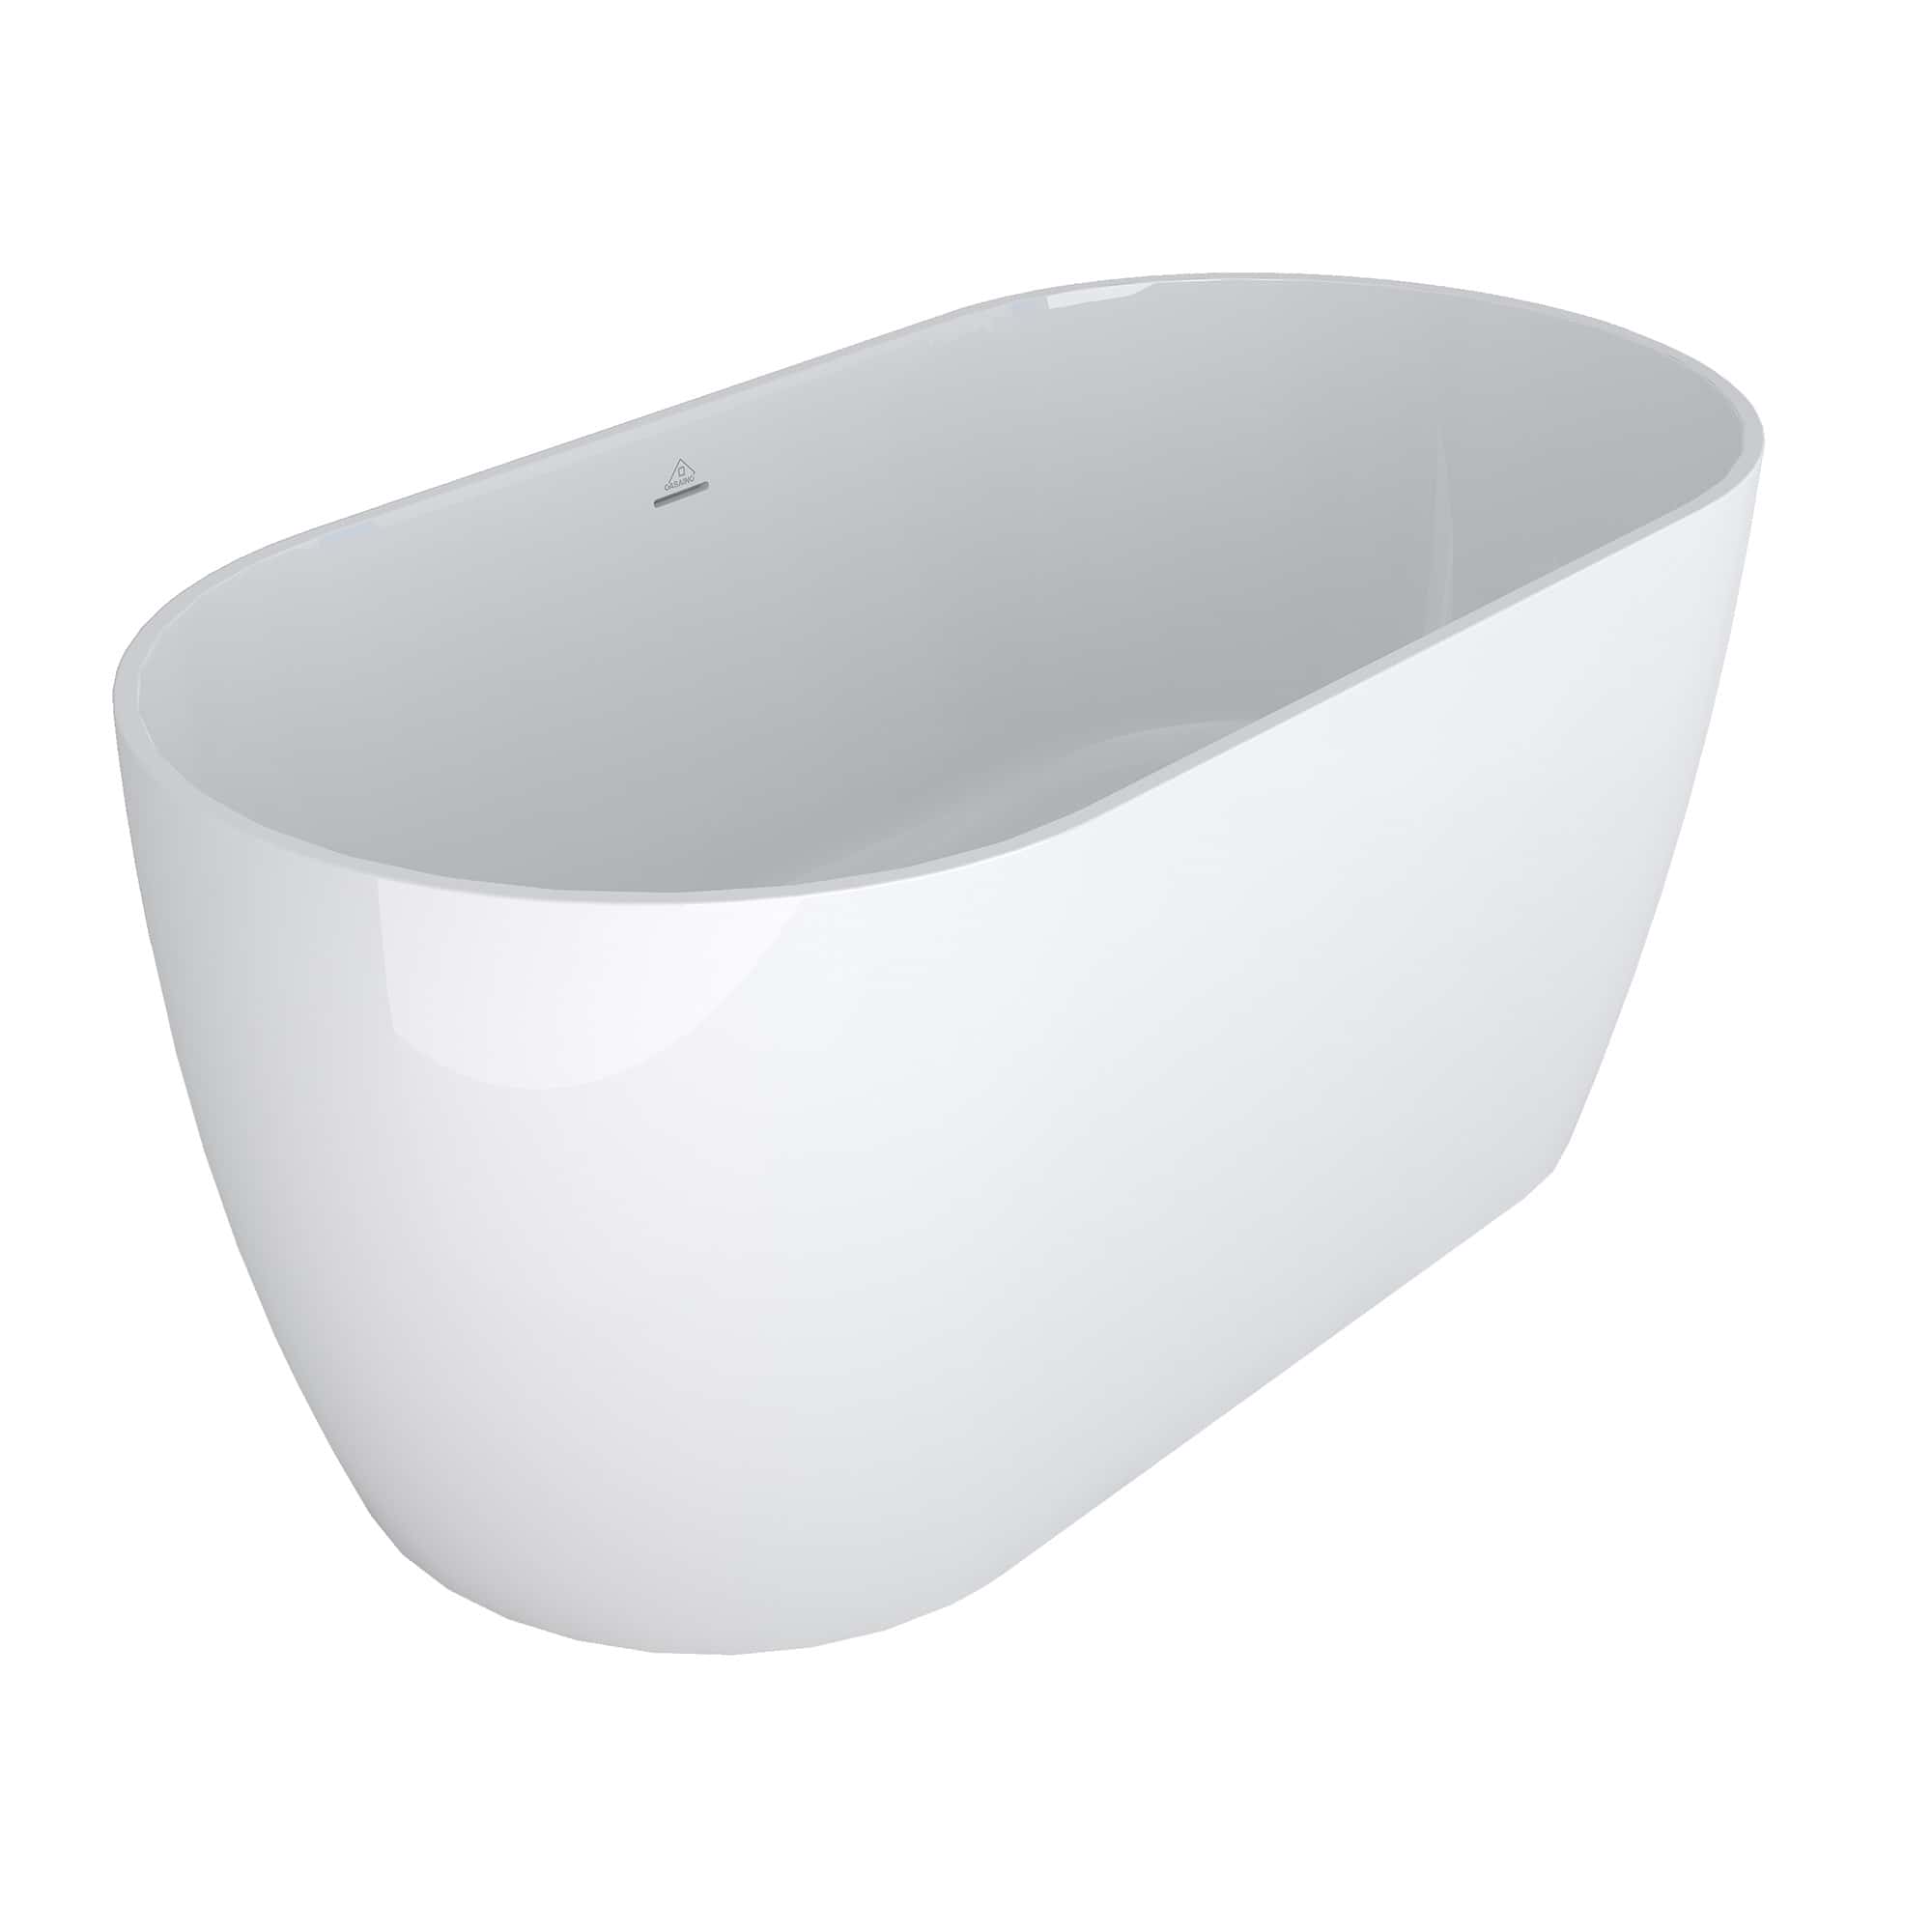 CASAINC 59 Inch Glossy White Freestanding Solid Surface Oval Soaking T